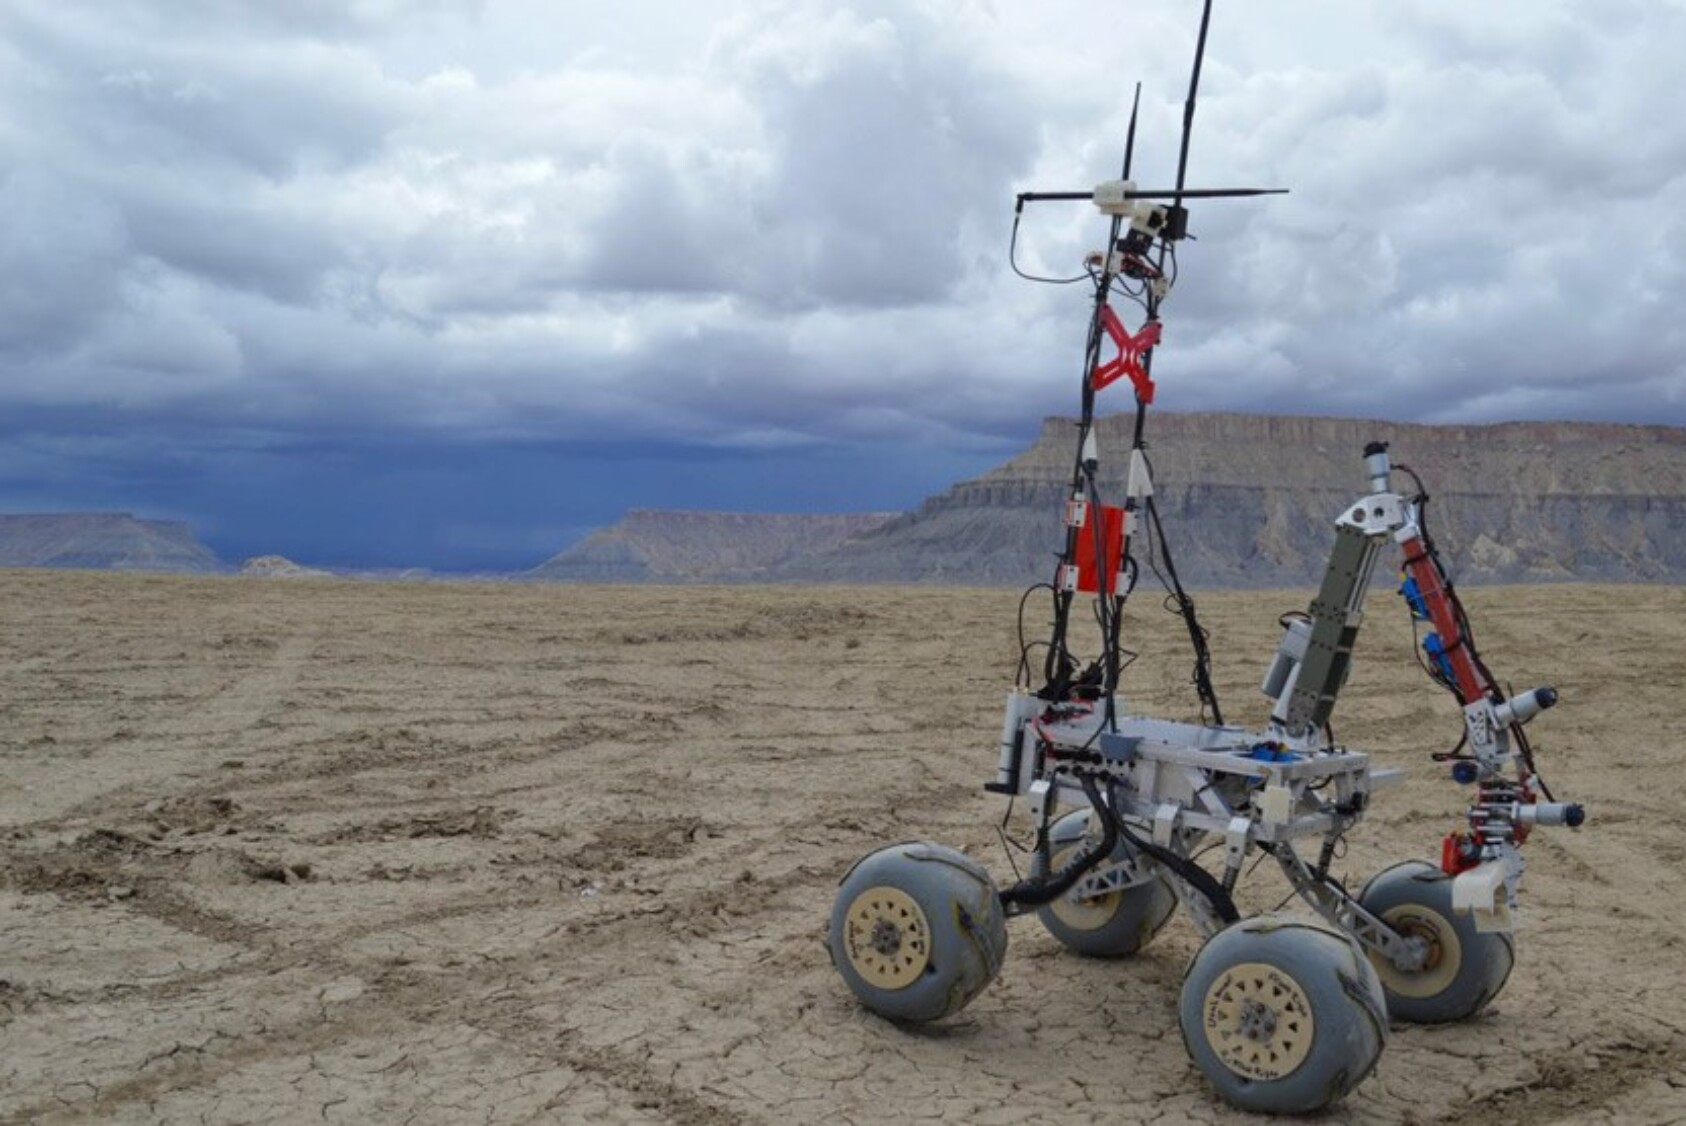 Several universities from across the globe will be competing against the Cornell Mars Rover team at the University Rover Challenge in summer 2023. The winner will receive the honor of presenting their rover at the International Mars Society's Conference.